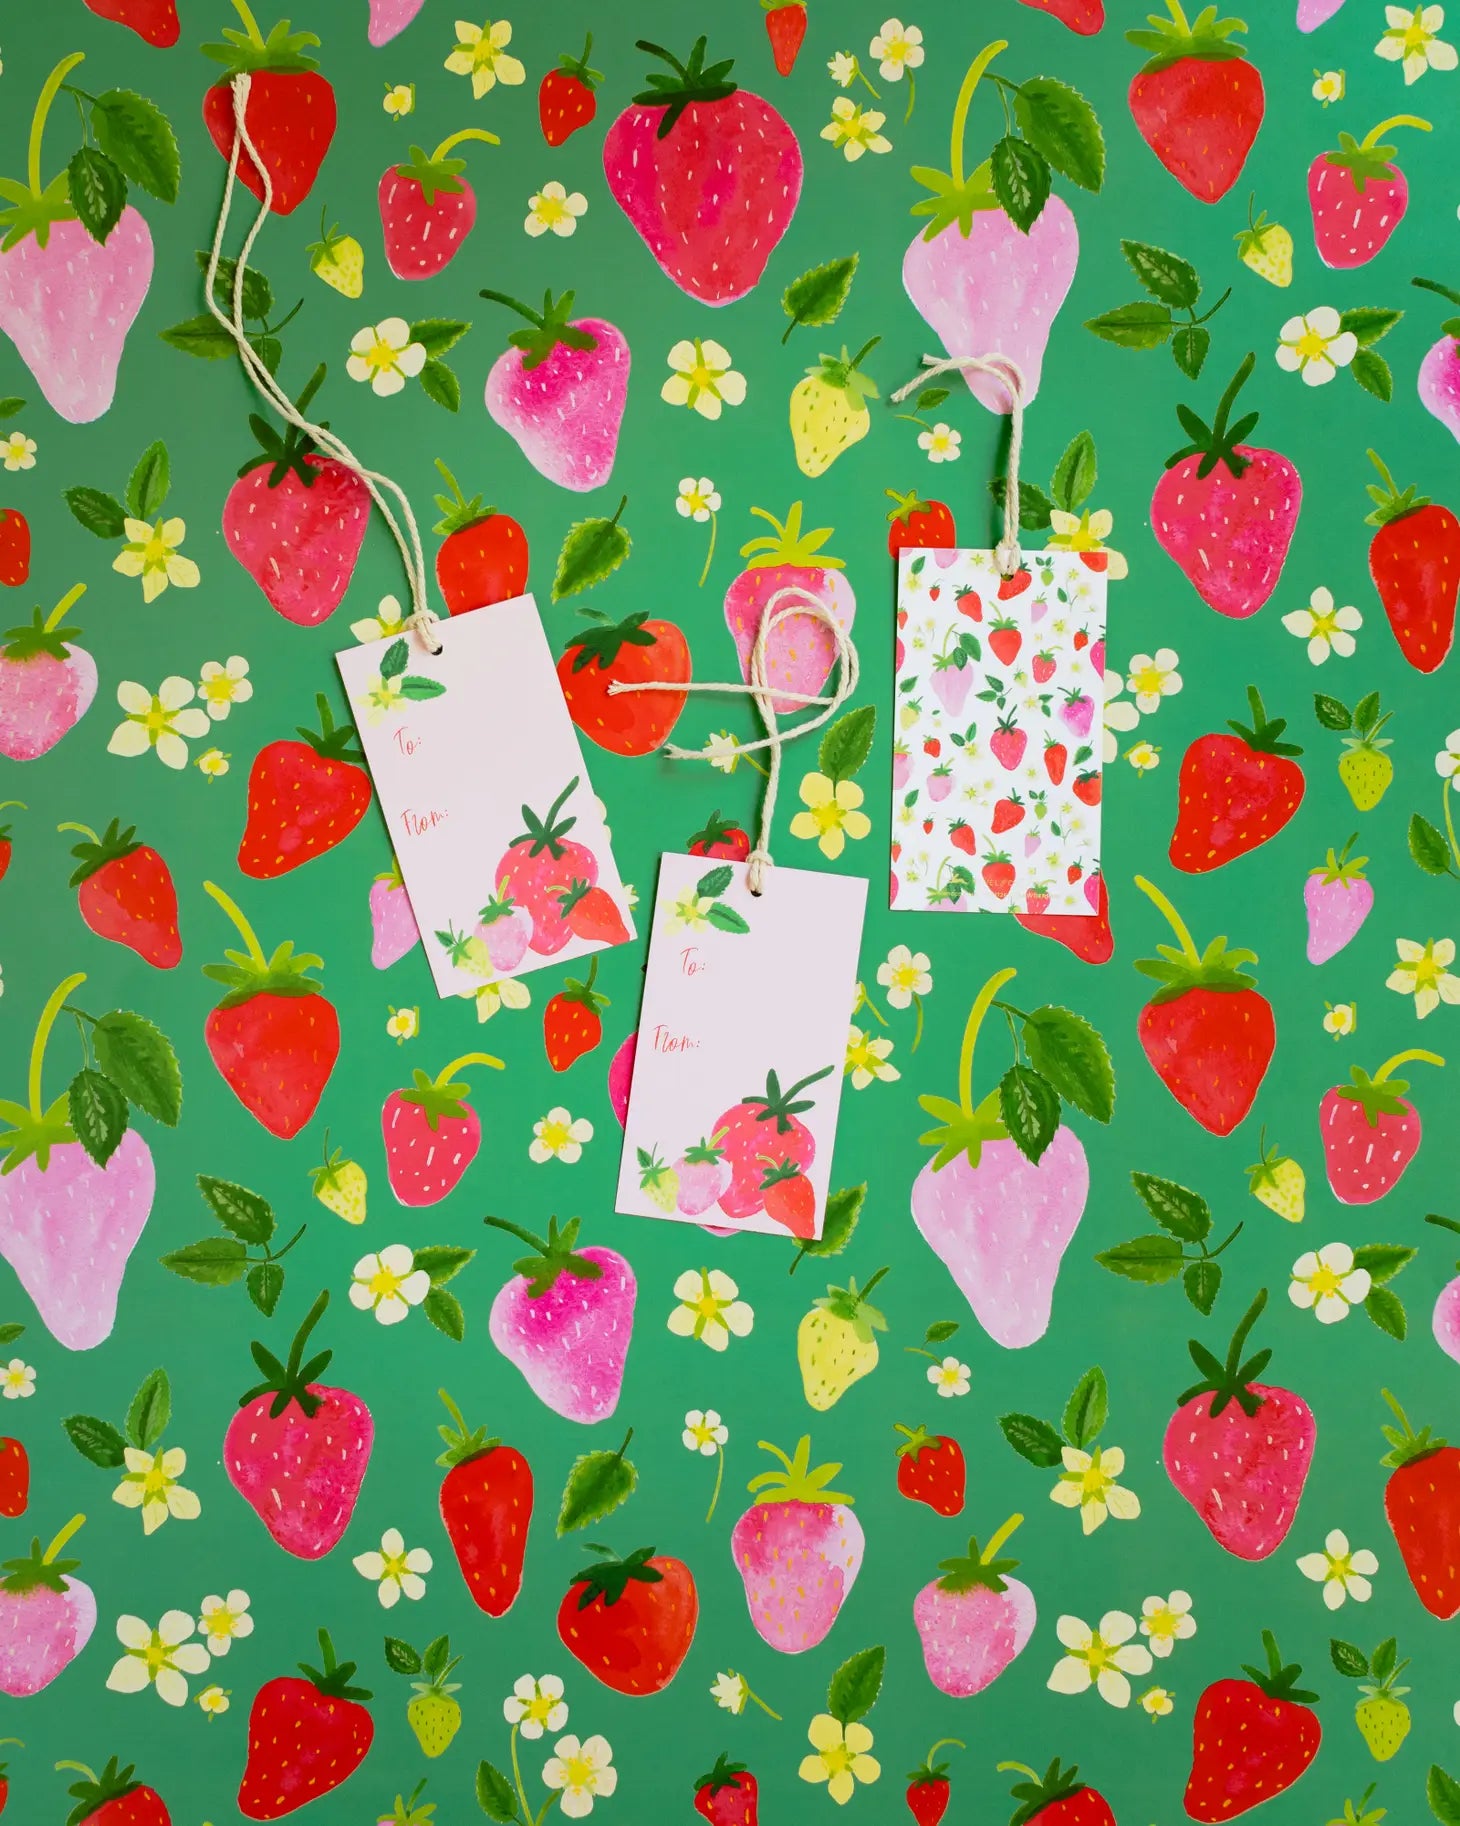 Strawberries Gift Tag Set of 10 – Parchment Paper